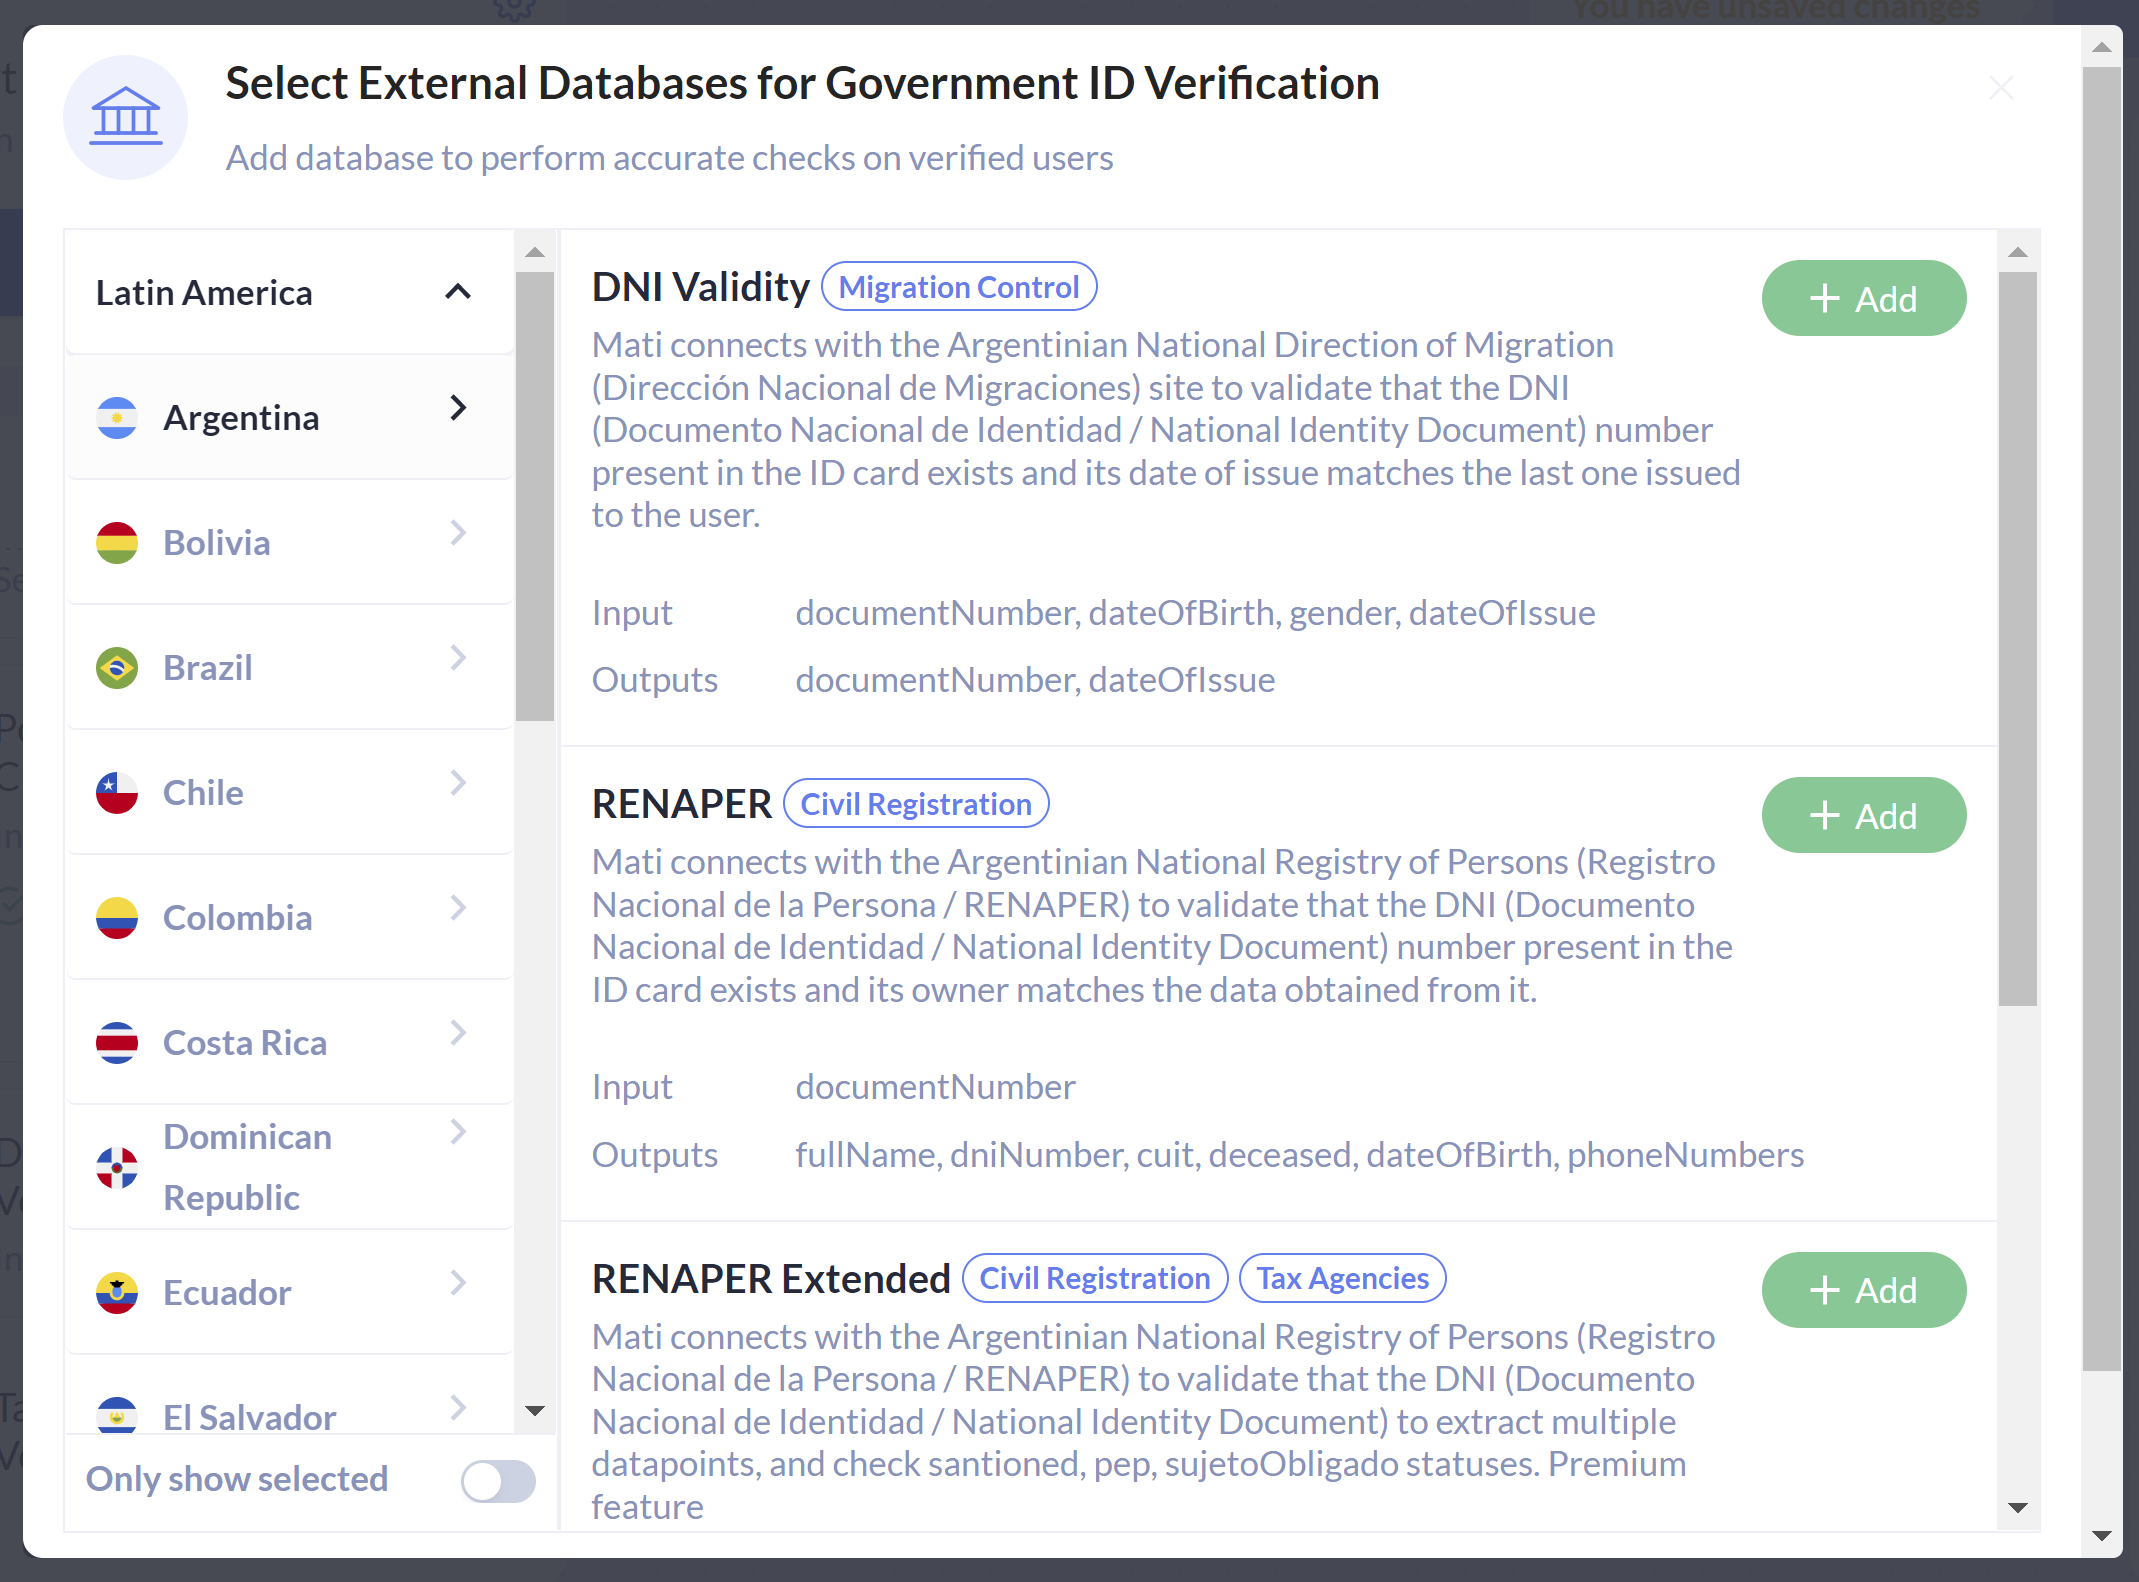 Gov ID Verification: left-hand panel shows a lit of available countries, right-hand panel shows available databases for that country.